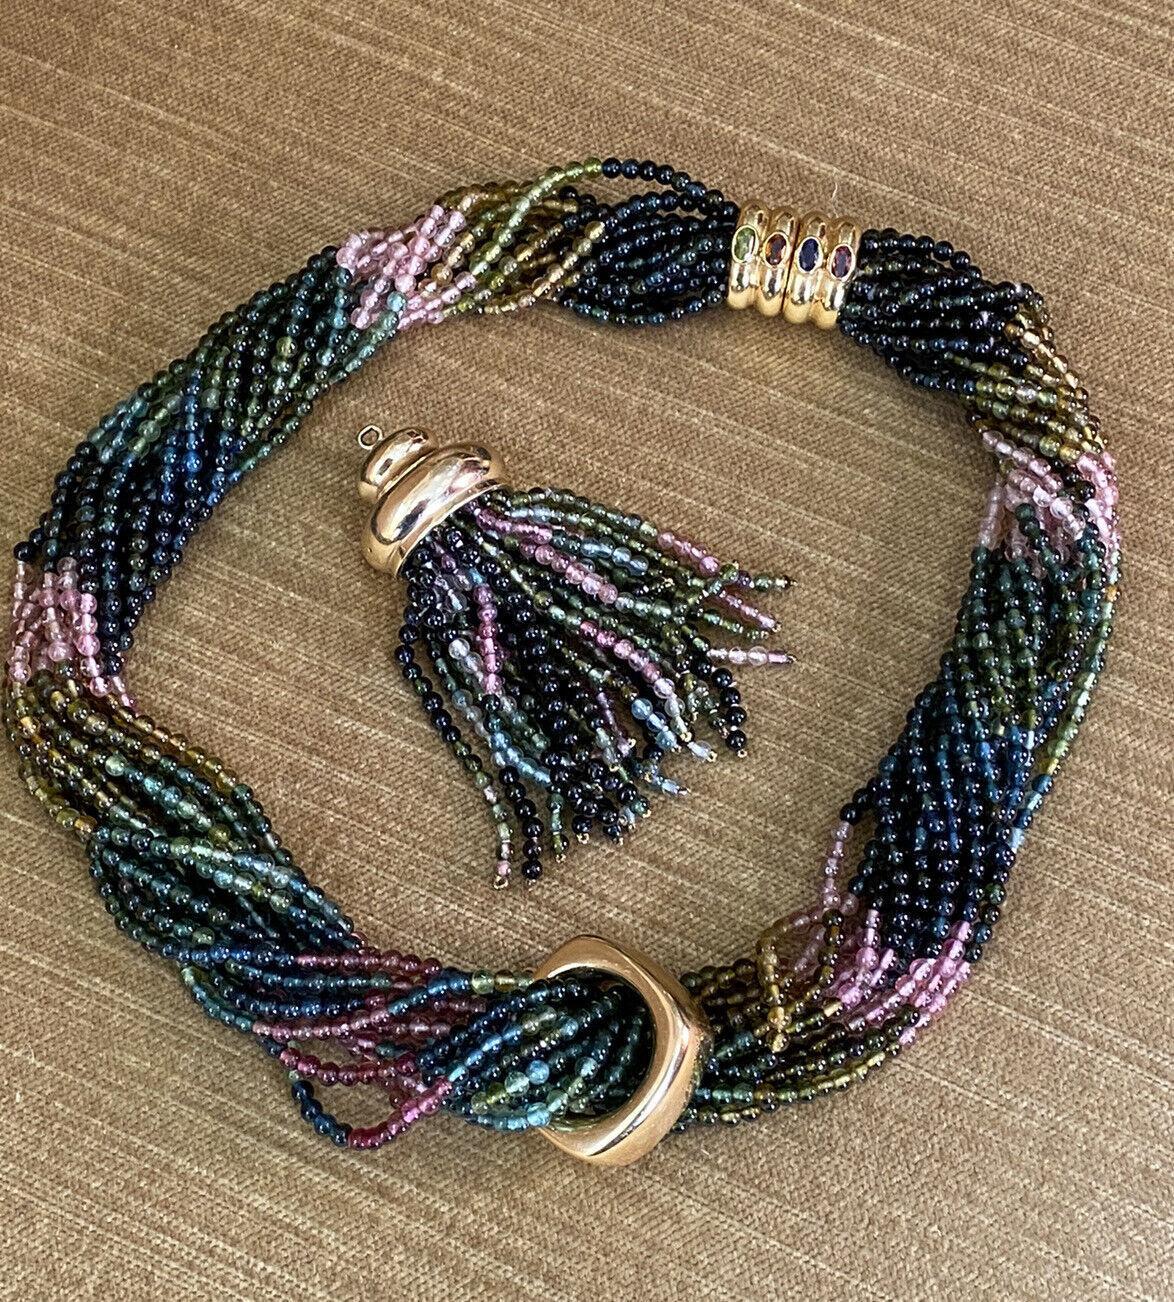 Multi-Strand Tourmaline Bead Necklace Detachable Tassel in 18k Yellow Gold

Multi-Strand Tourmaline Necklace features 14 strands of Tourmaline beads with a beautiful gradient of colors from light green to dark green and pink beads, accented by an